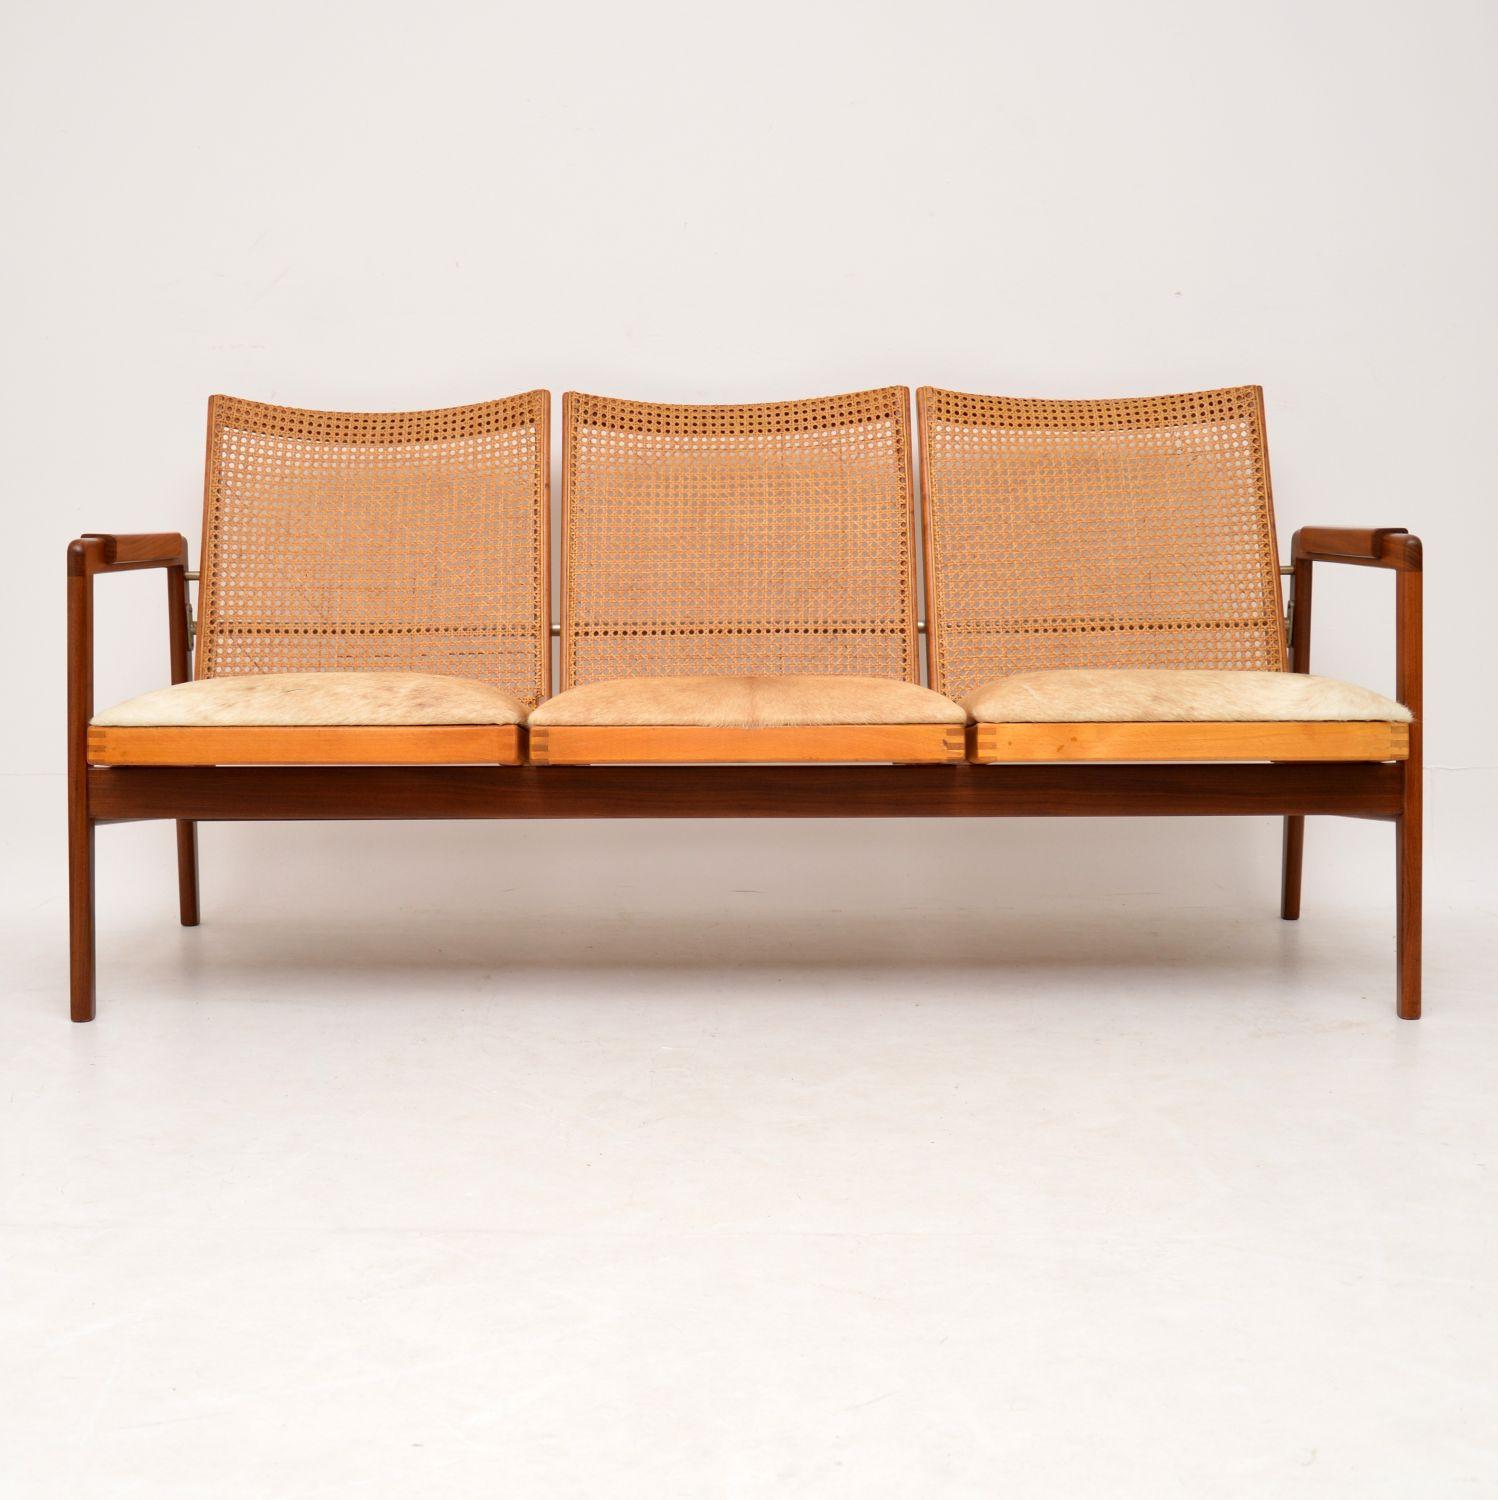 A stunning and very rare sofa made in Holland in the 1950s, this was designed by P.J Muntendam for Gebroeders Jonkers. It has a solid Afromosia frame, cane rattan back and amazing cow hide upholstery on the seats. The condition is superb for its